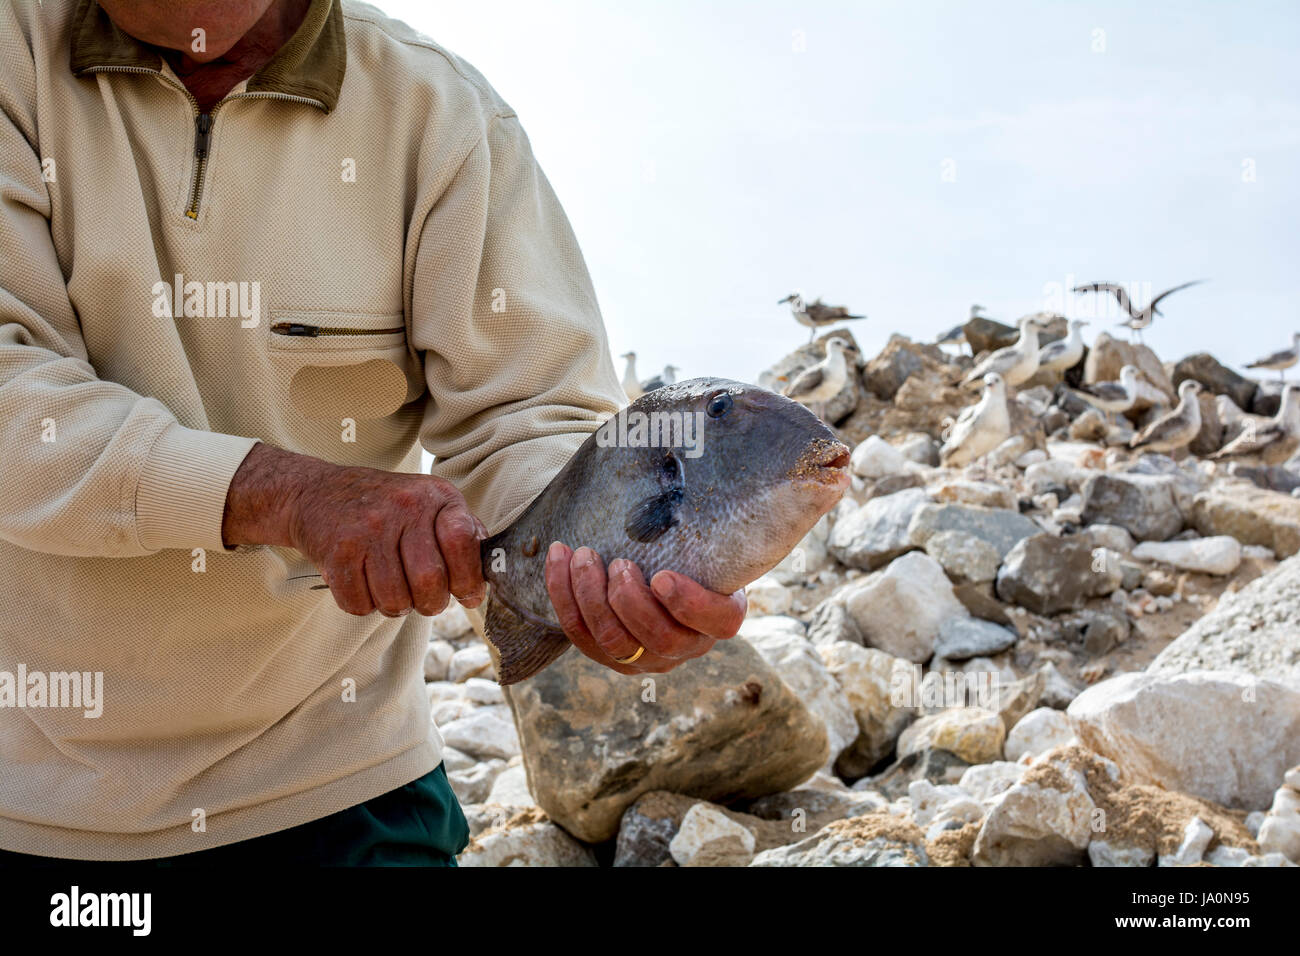 Two men handling a big fish that they caught in a big plastic or vinyl bag  or holder for sport fishing before returning the fish into the lake Stock  Photo - Alamy